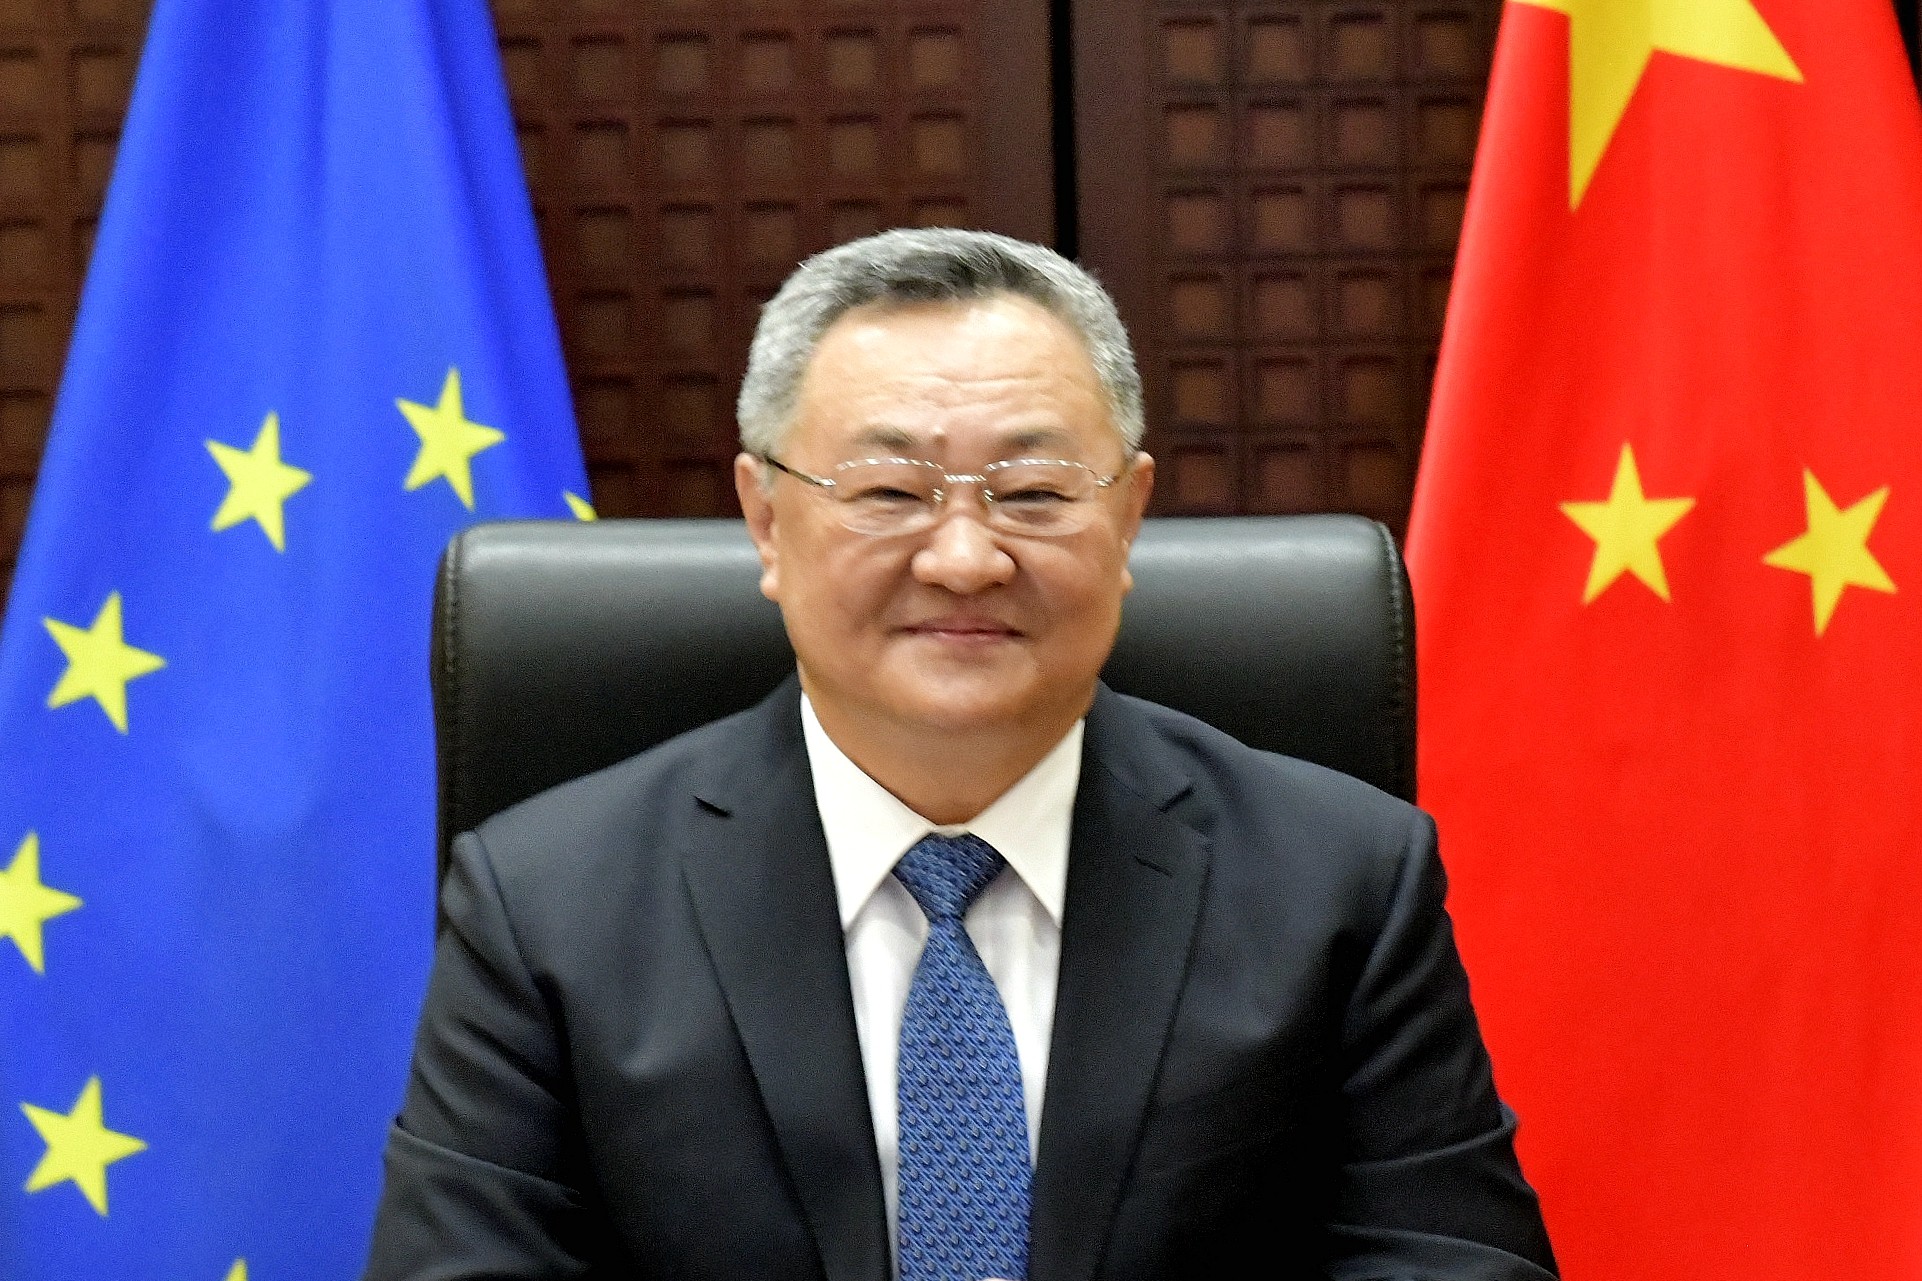 Fu Cong, China’s ambassador to the European Union, spoke to state broadcaster CGTN about bilateral relations. Photo: CGTN